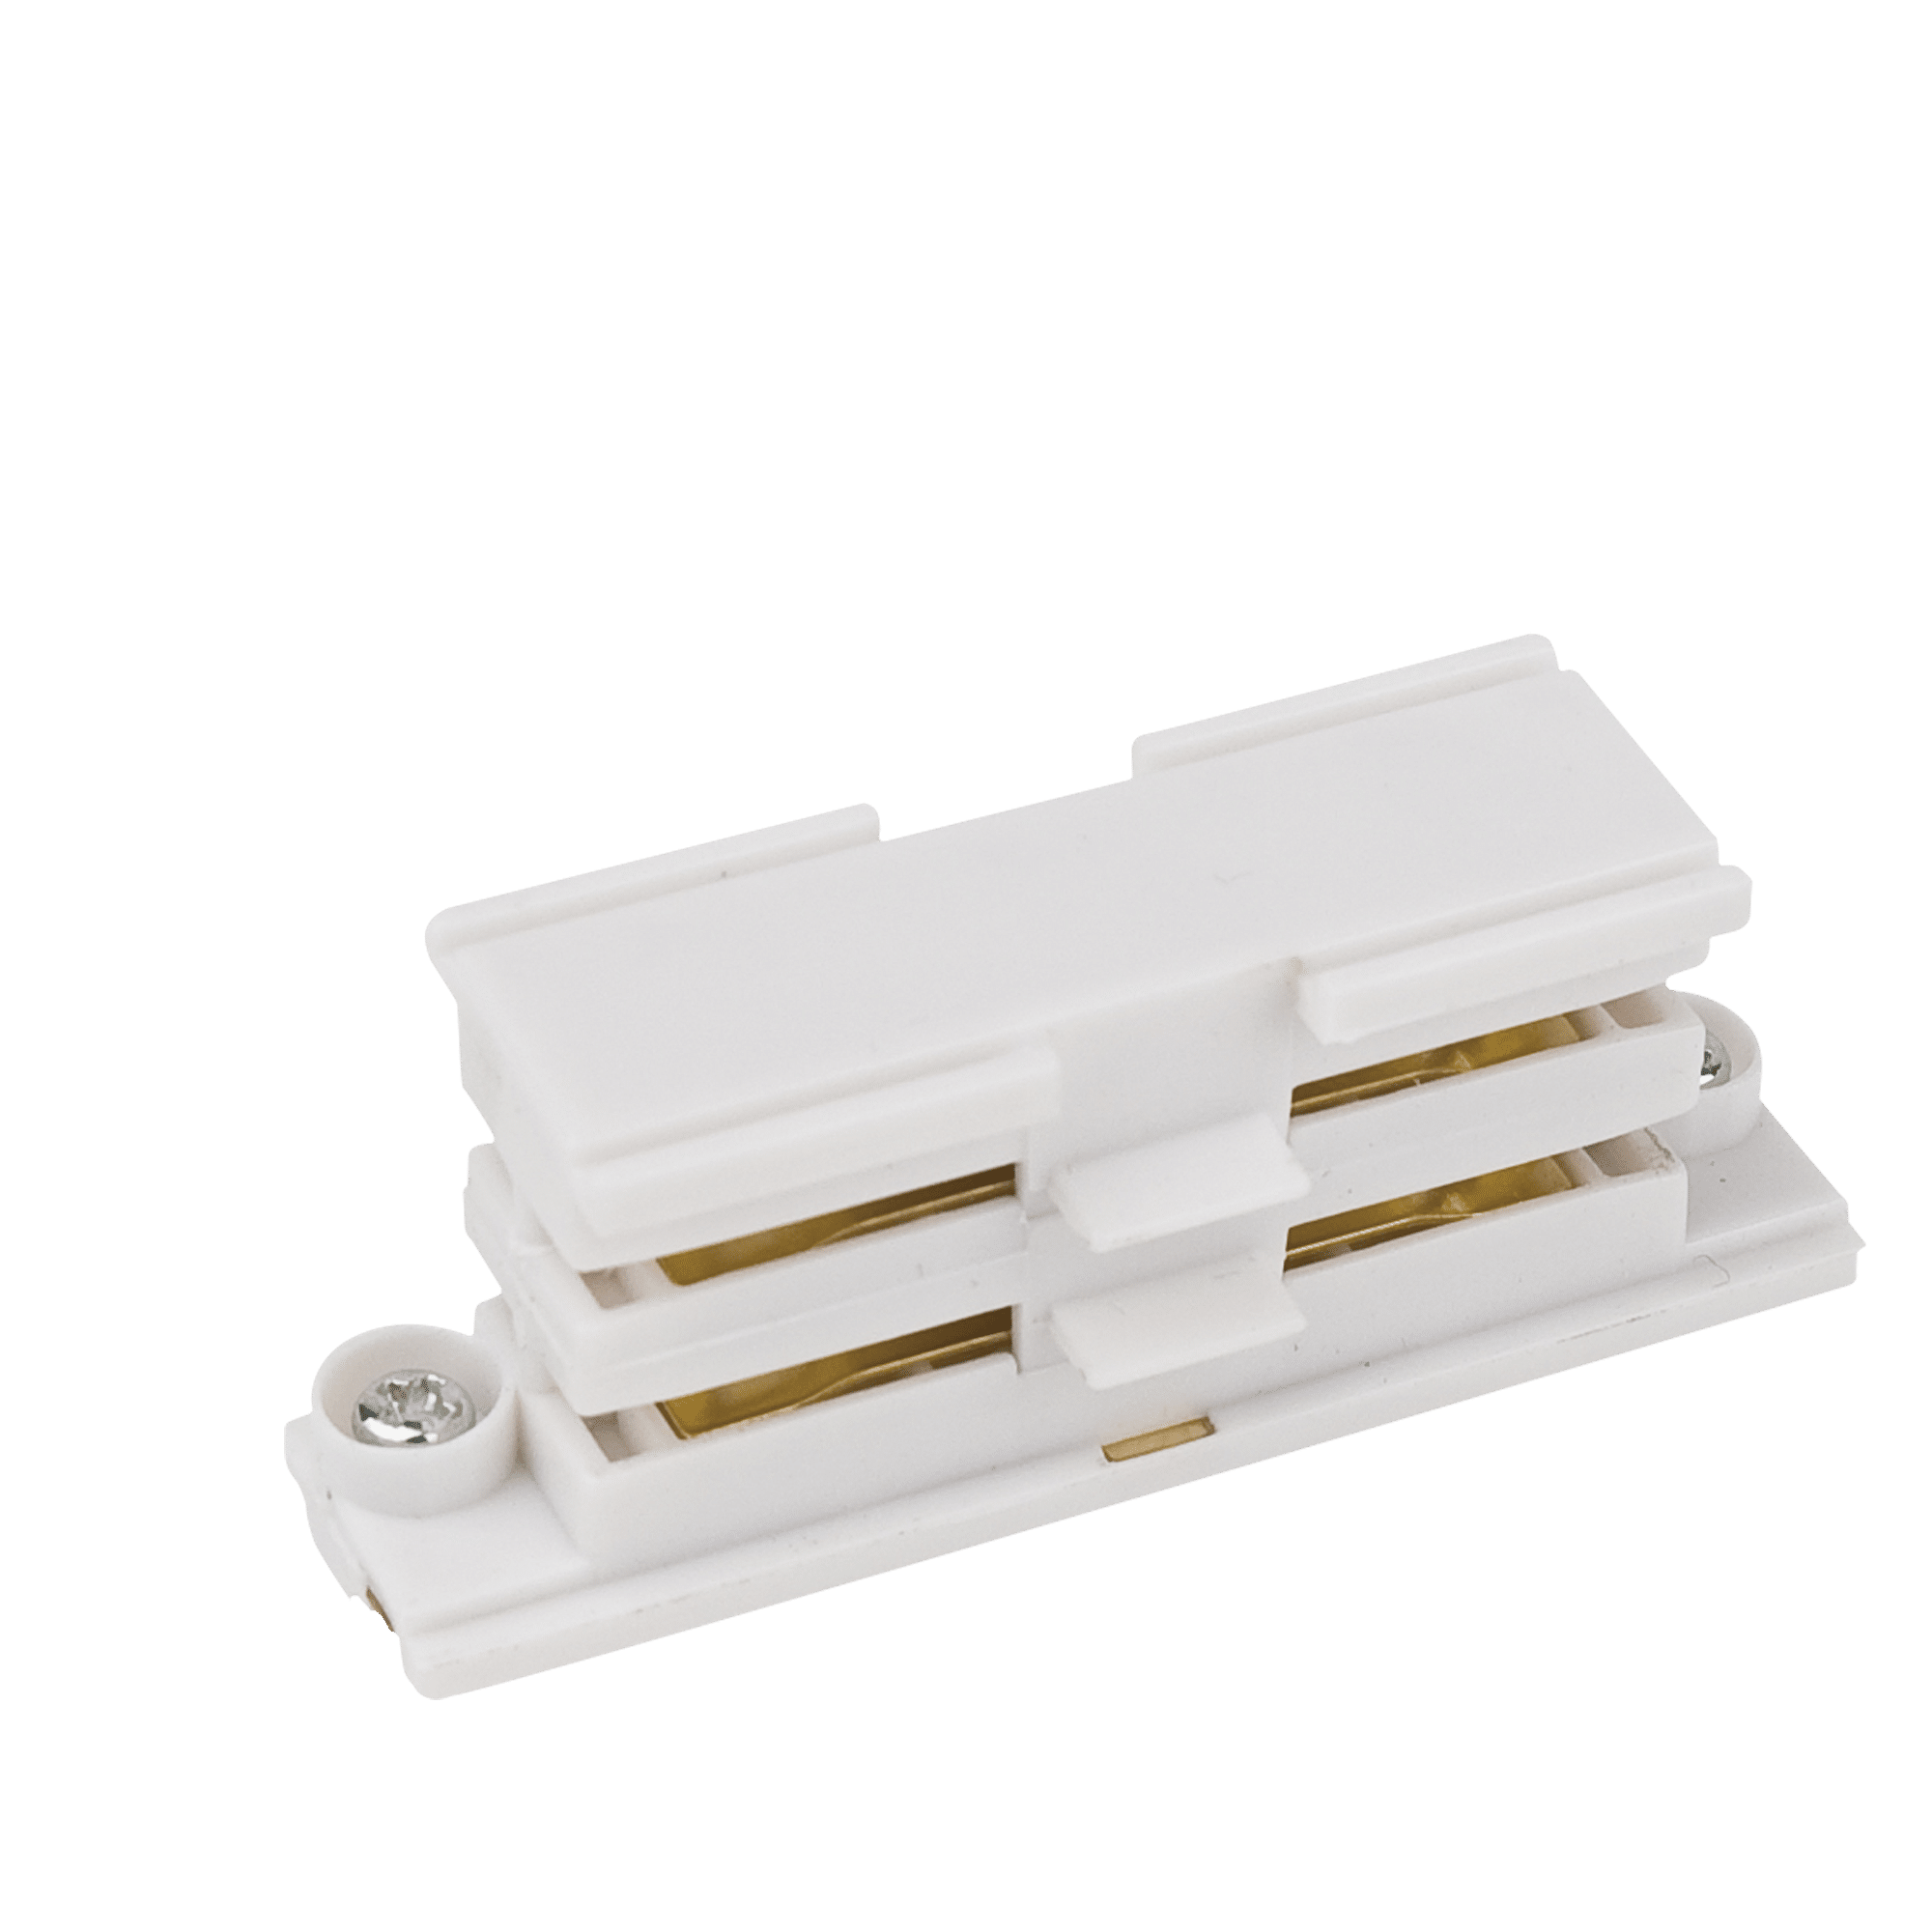 3-Phase Straight Connector - Onlinediscowinkel.nl